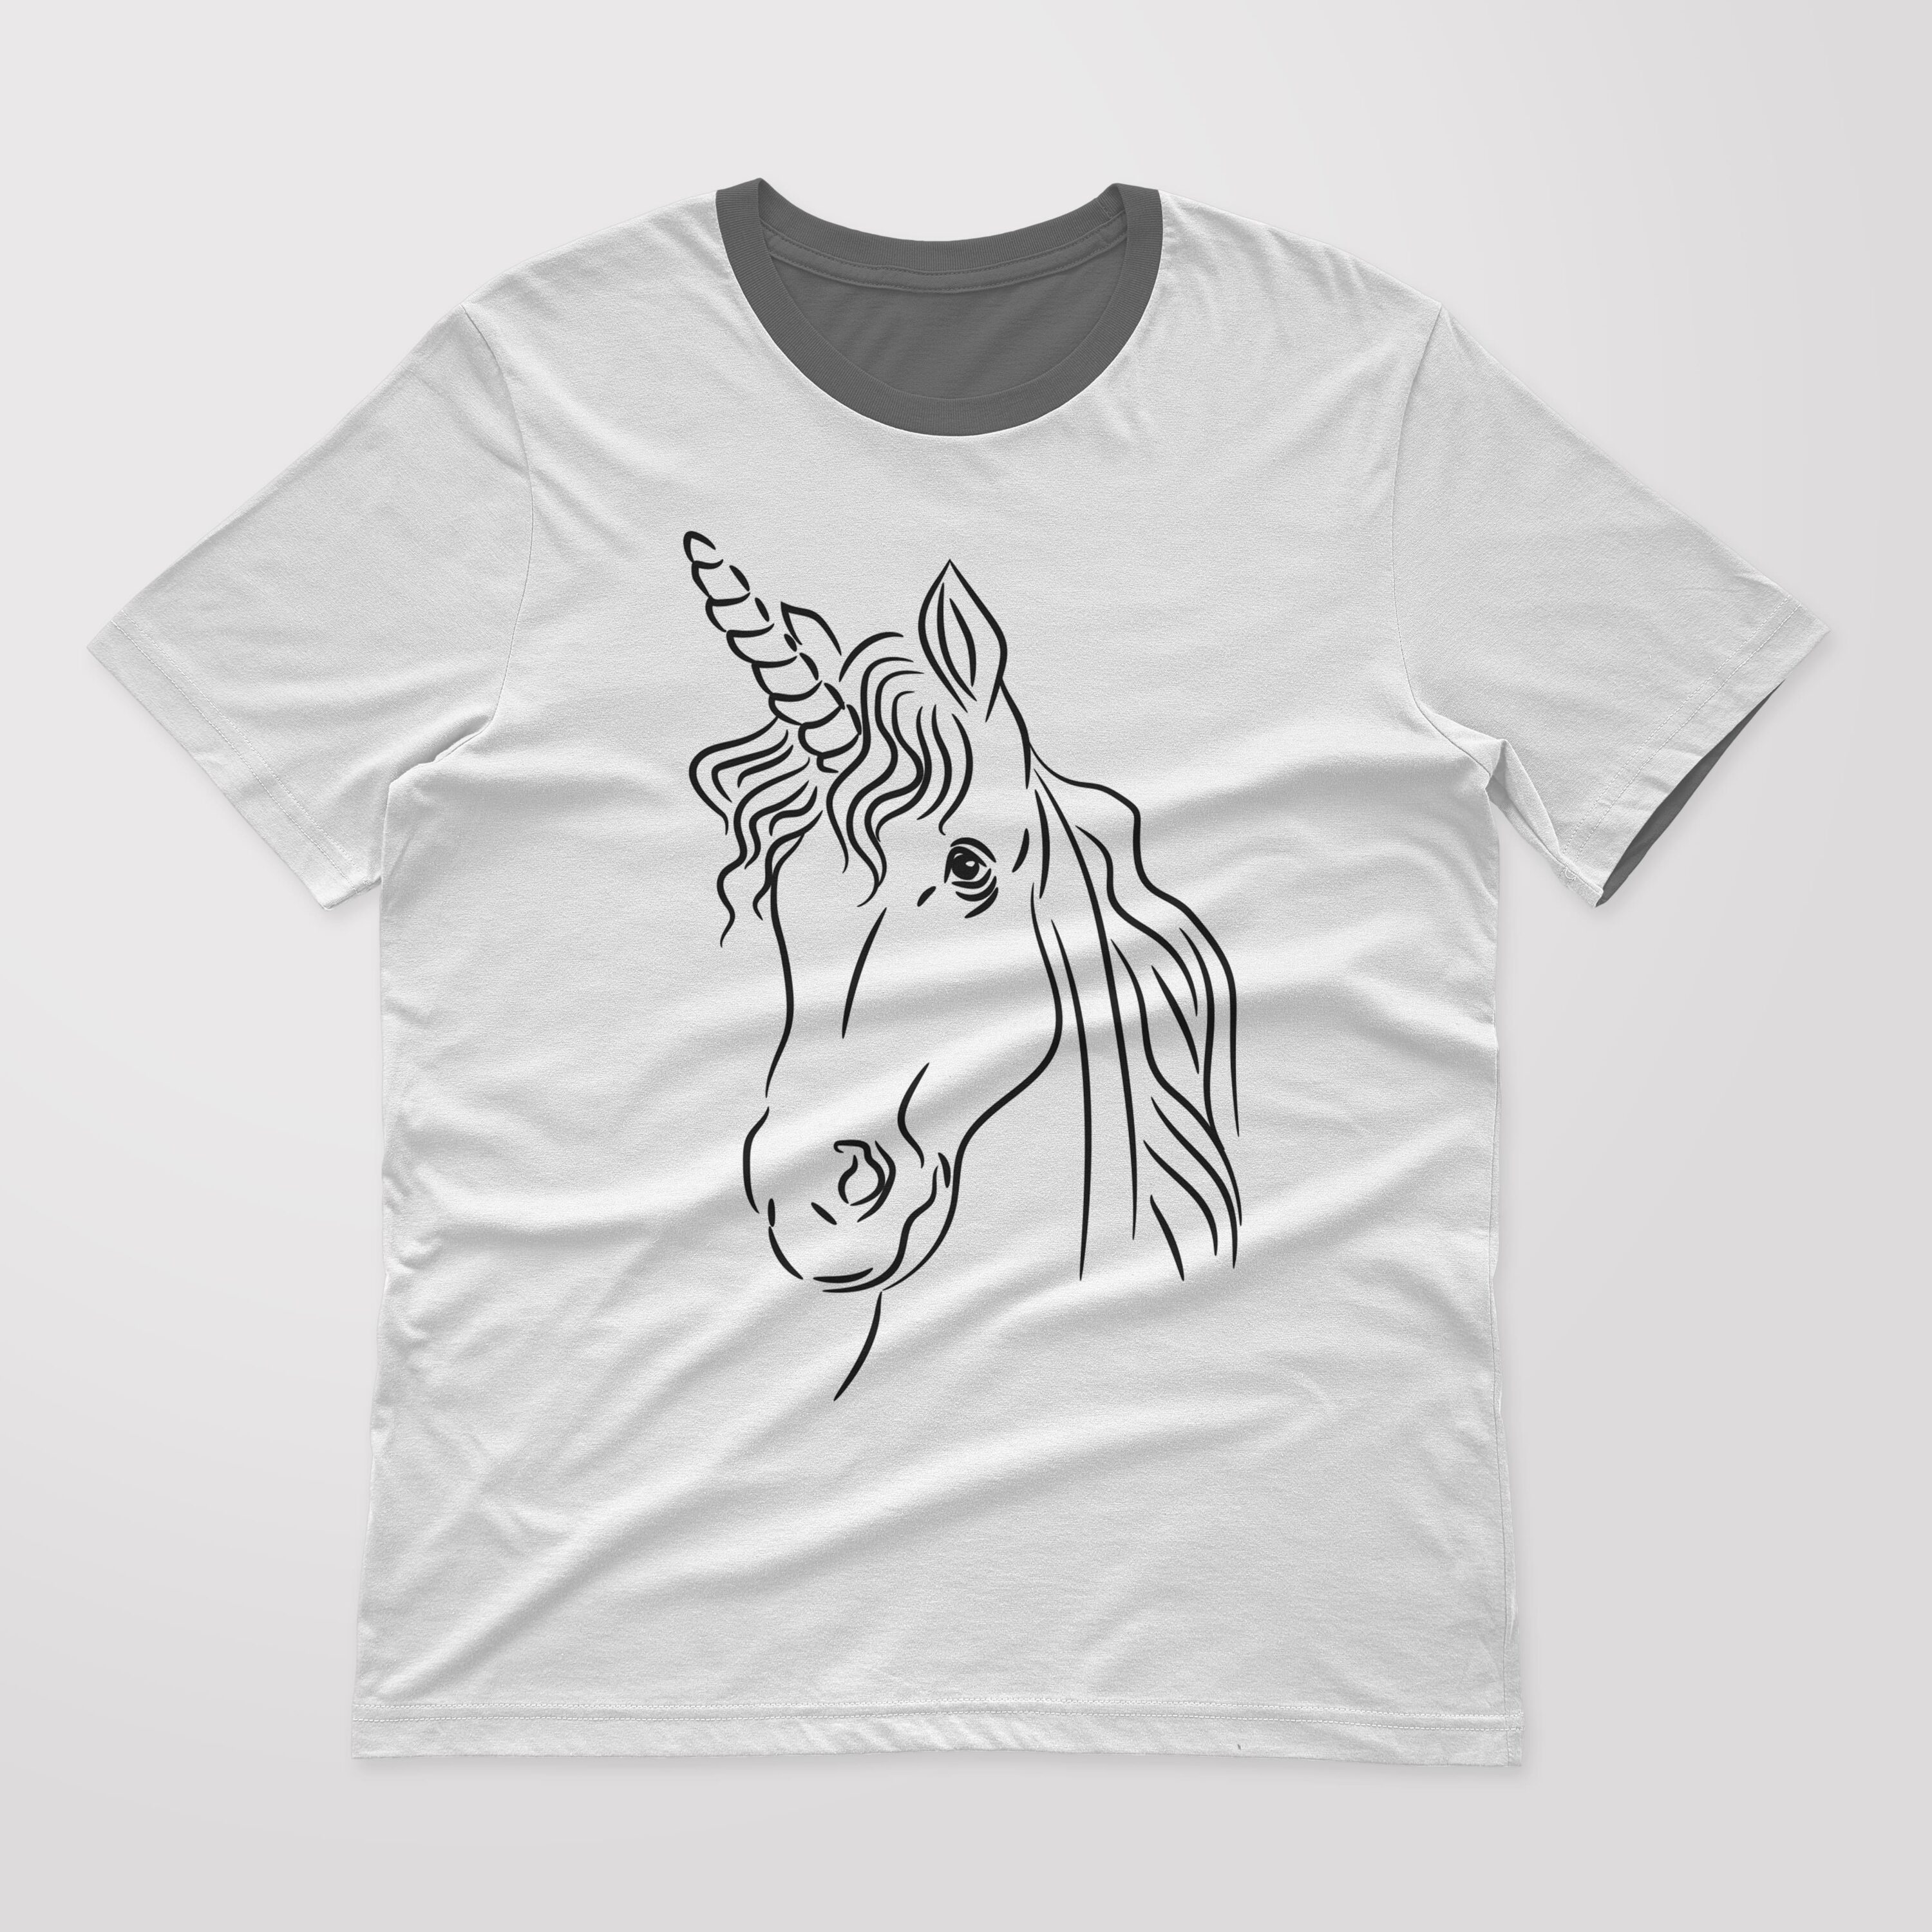 Gray t-shirt with a dark gray collar and a black unicorn head on a gray background.